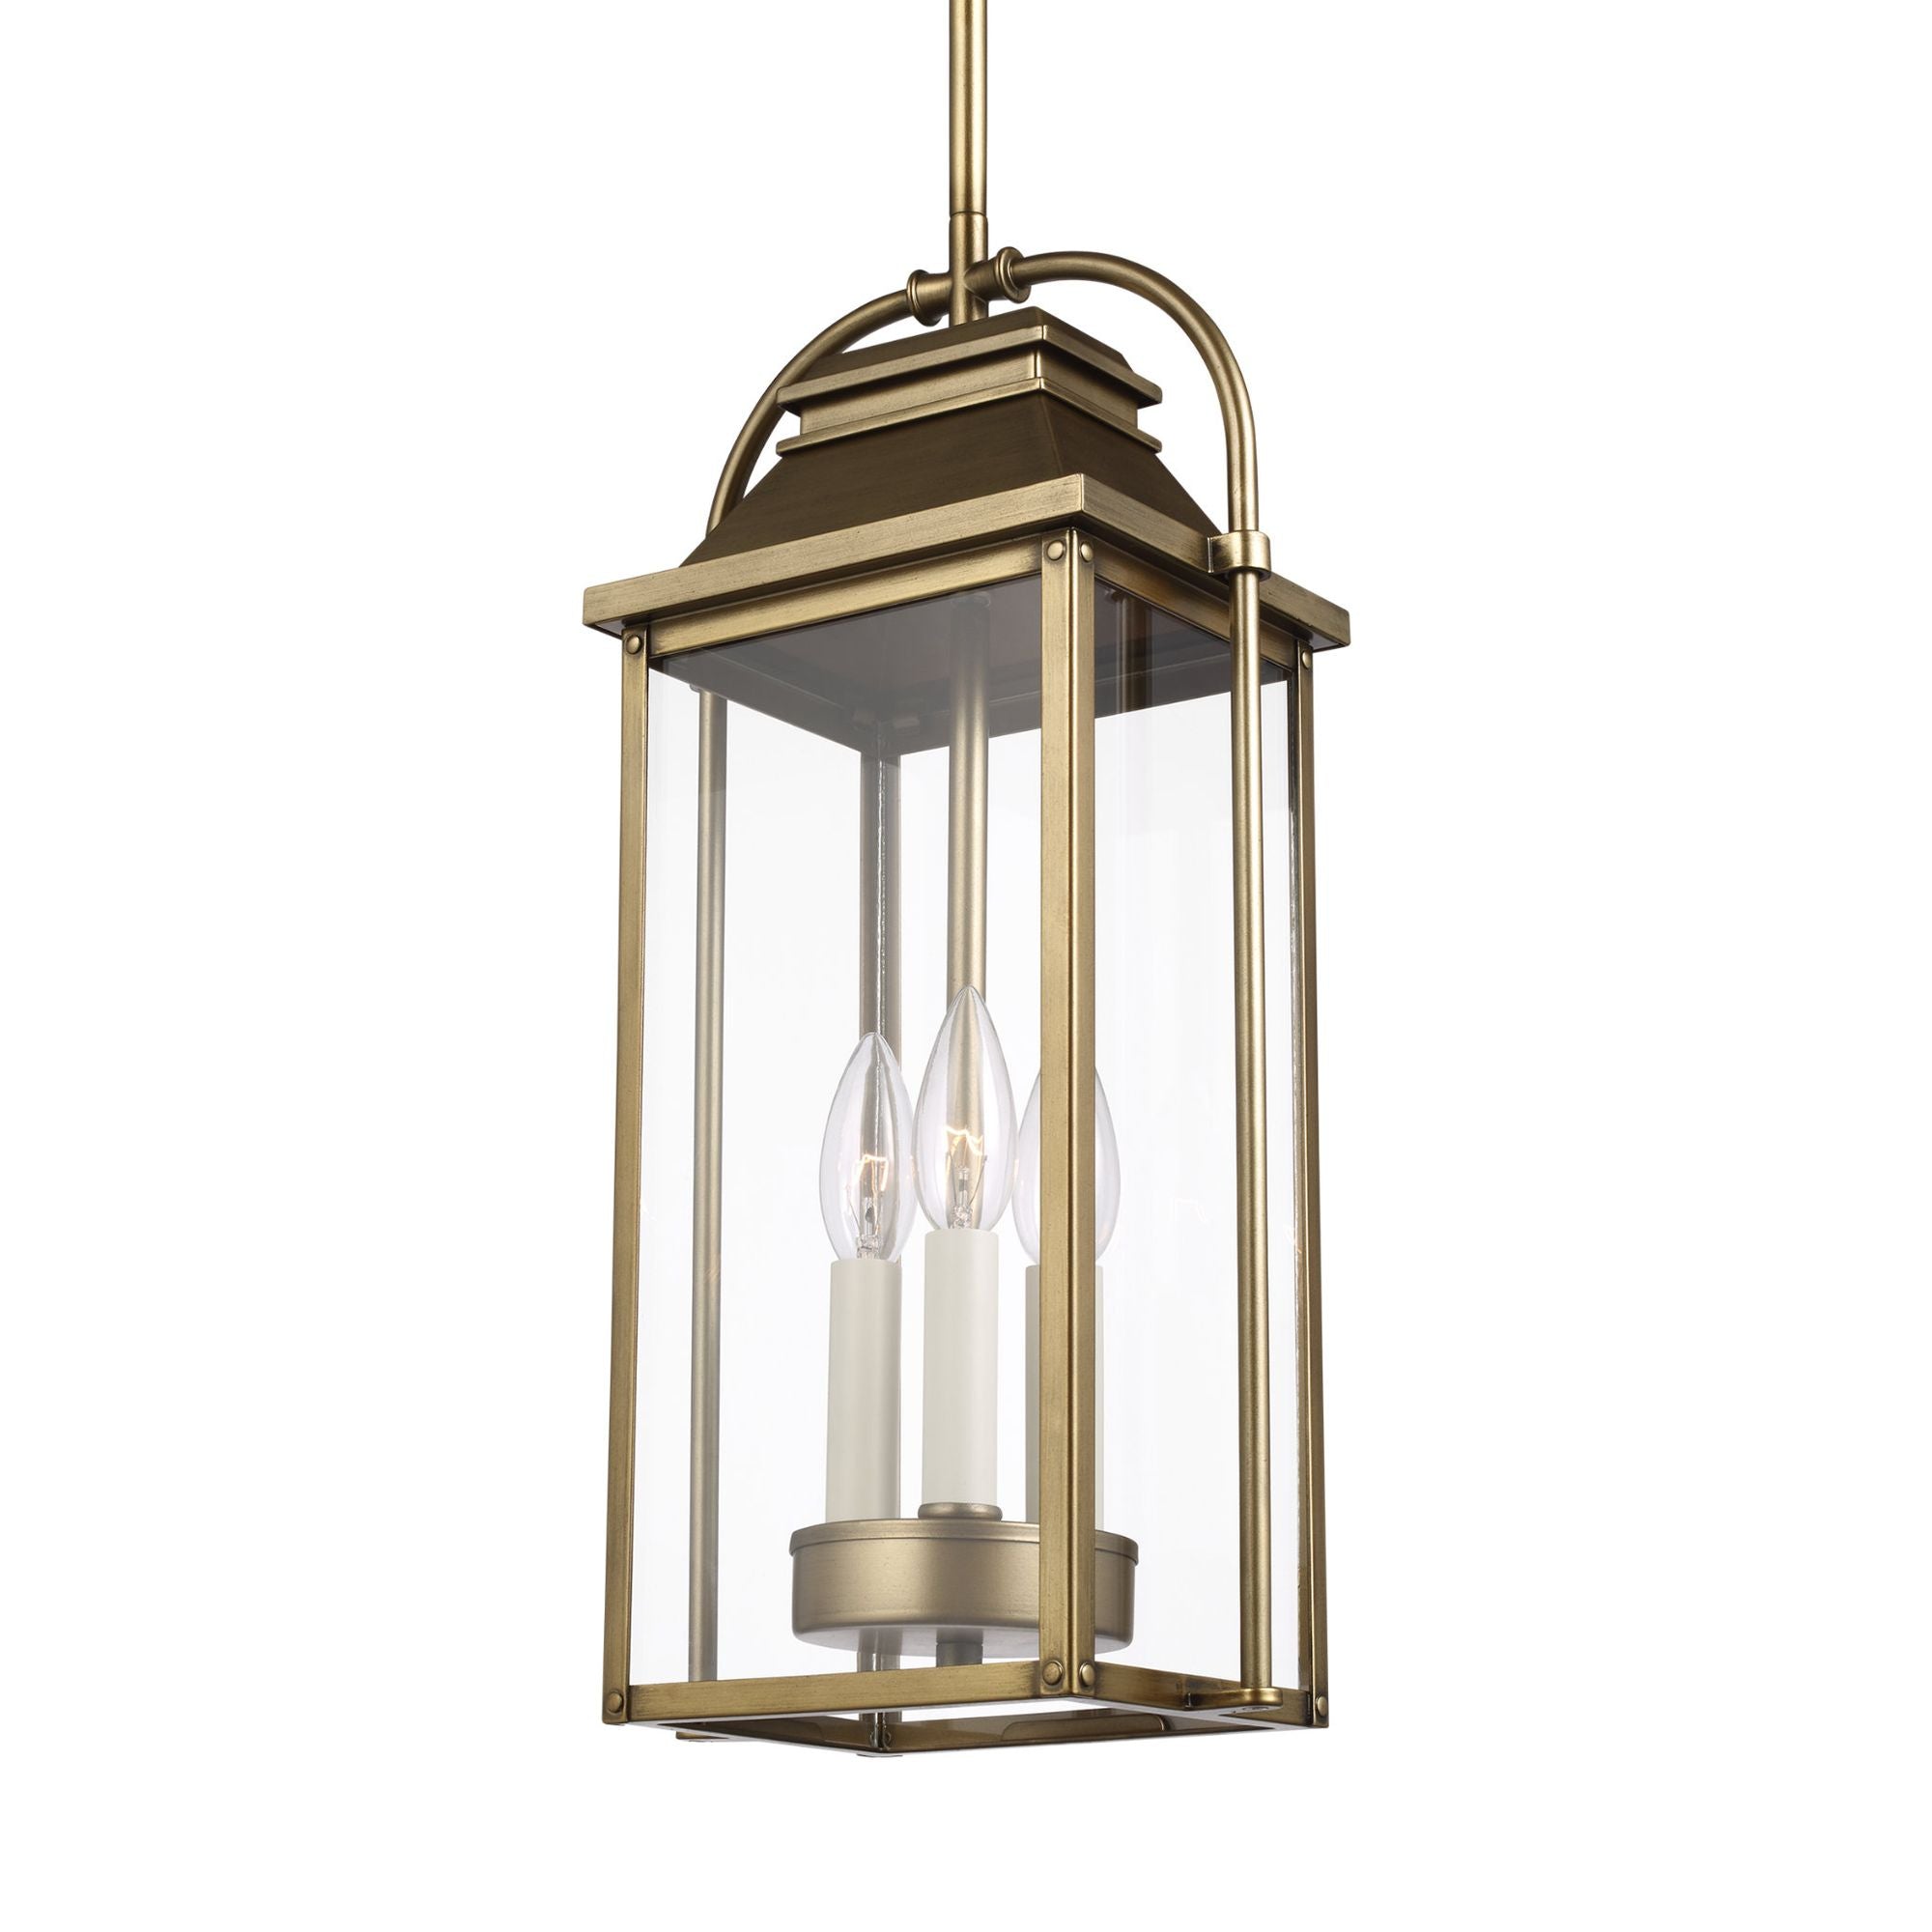 Sean Lavin Wellsworth Pendant in Painted Distressed Brass